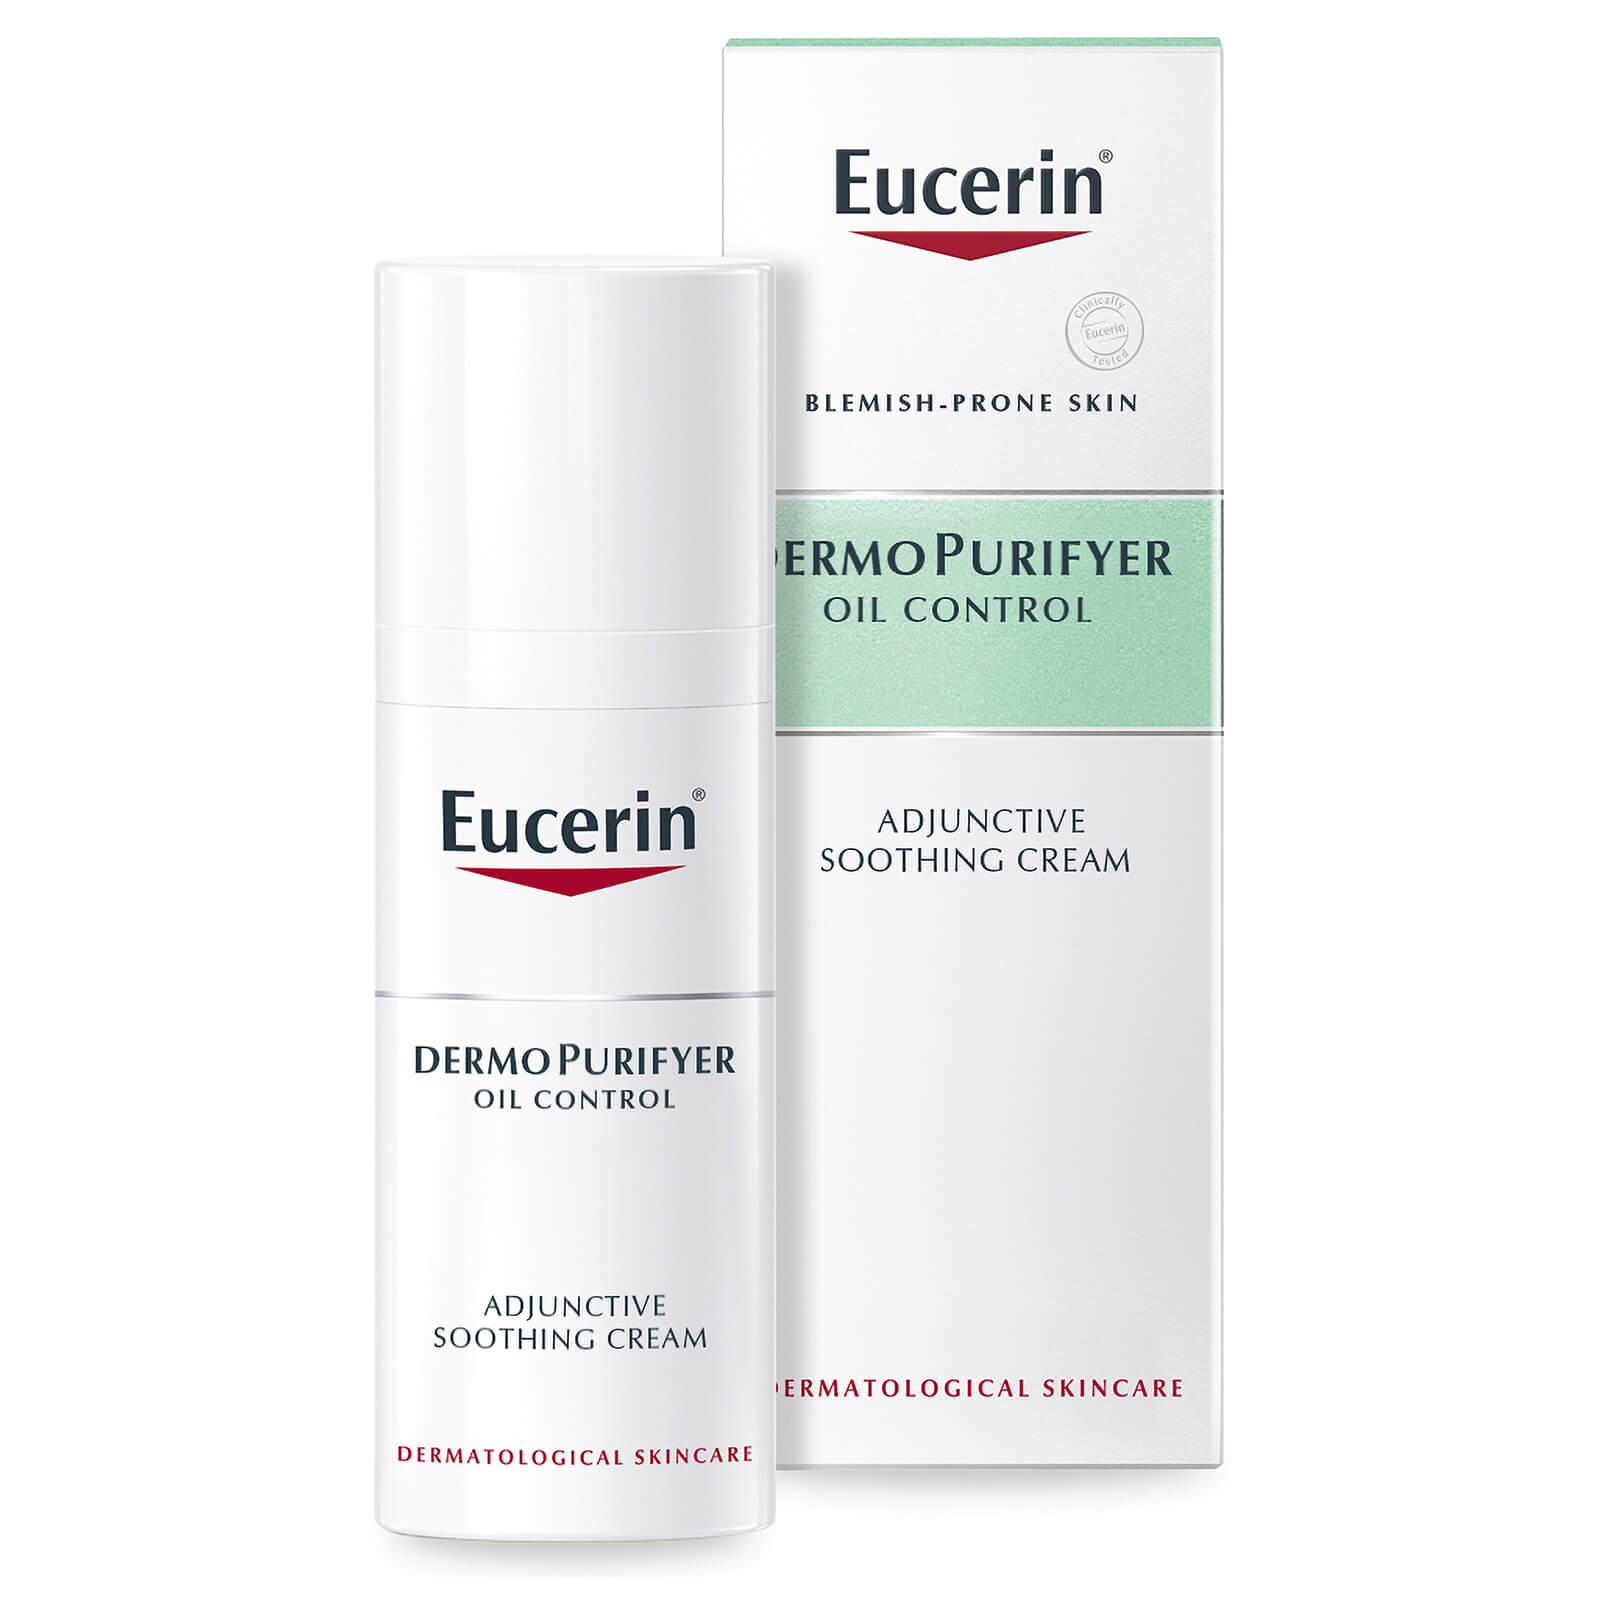 Eucerin Dermo Purifyer Oil Control Adjunctive Soothing Cream